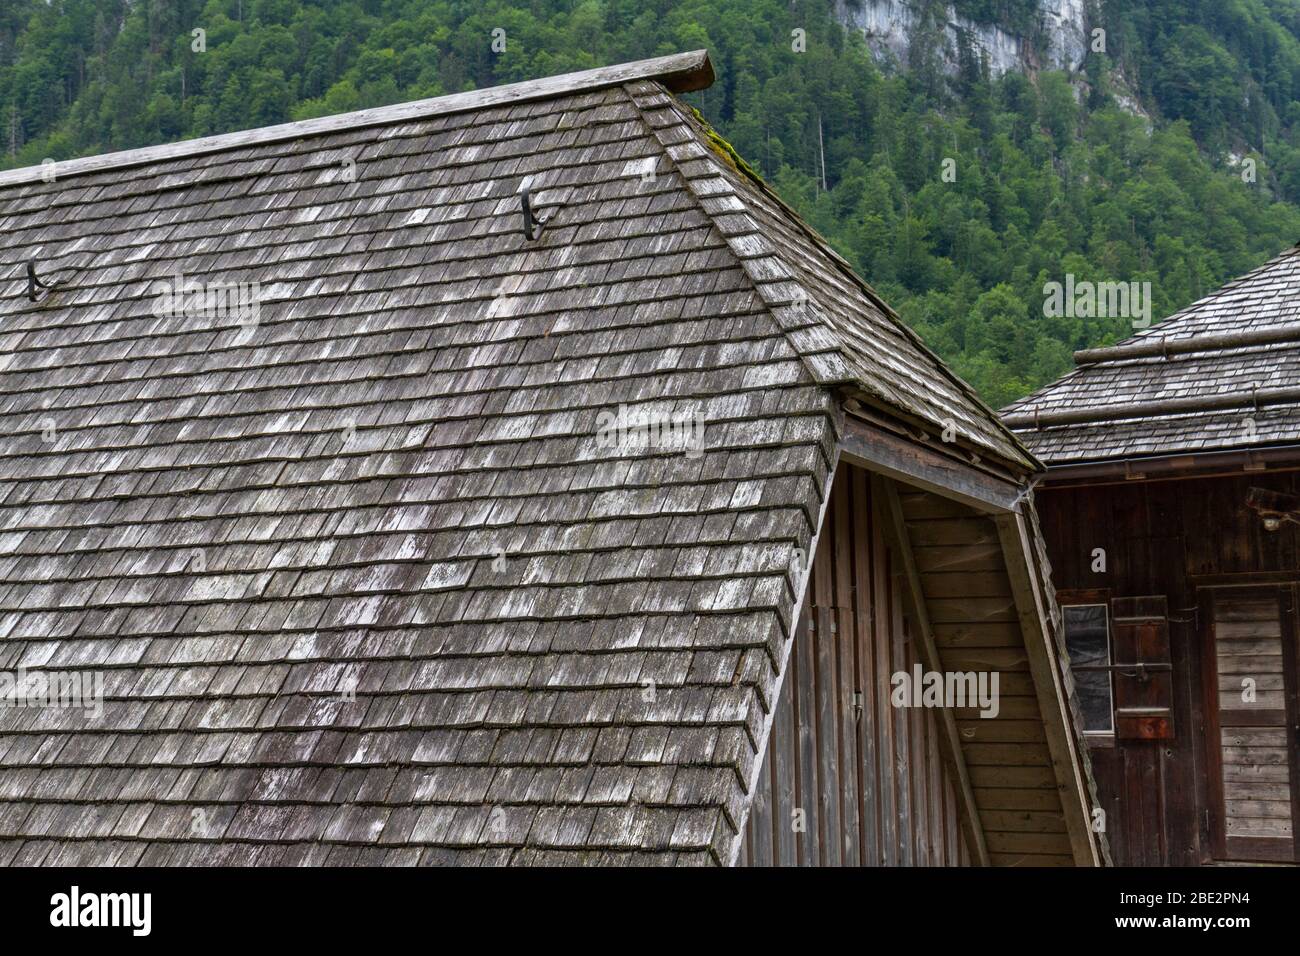 Detail showing wood roof tiles/roof shingles on a building in Konigssee, Bavaria, Germany. Stock Photo